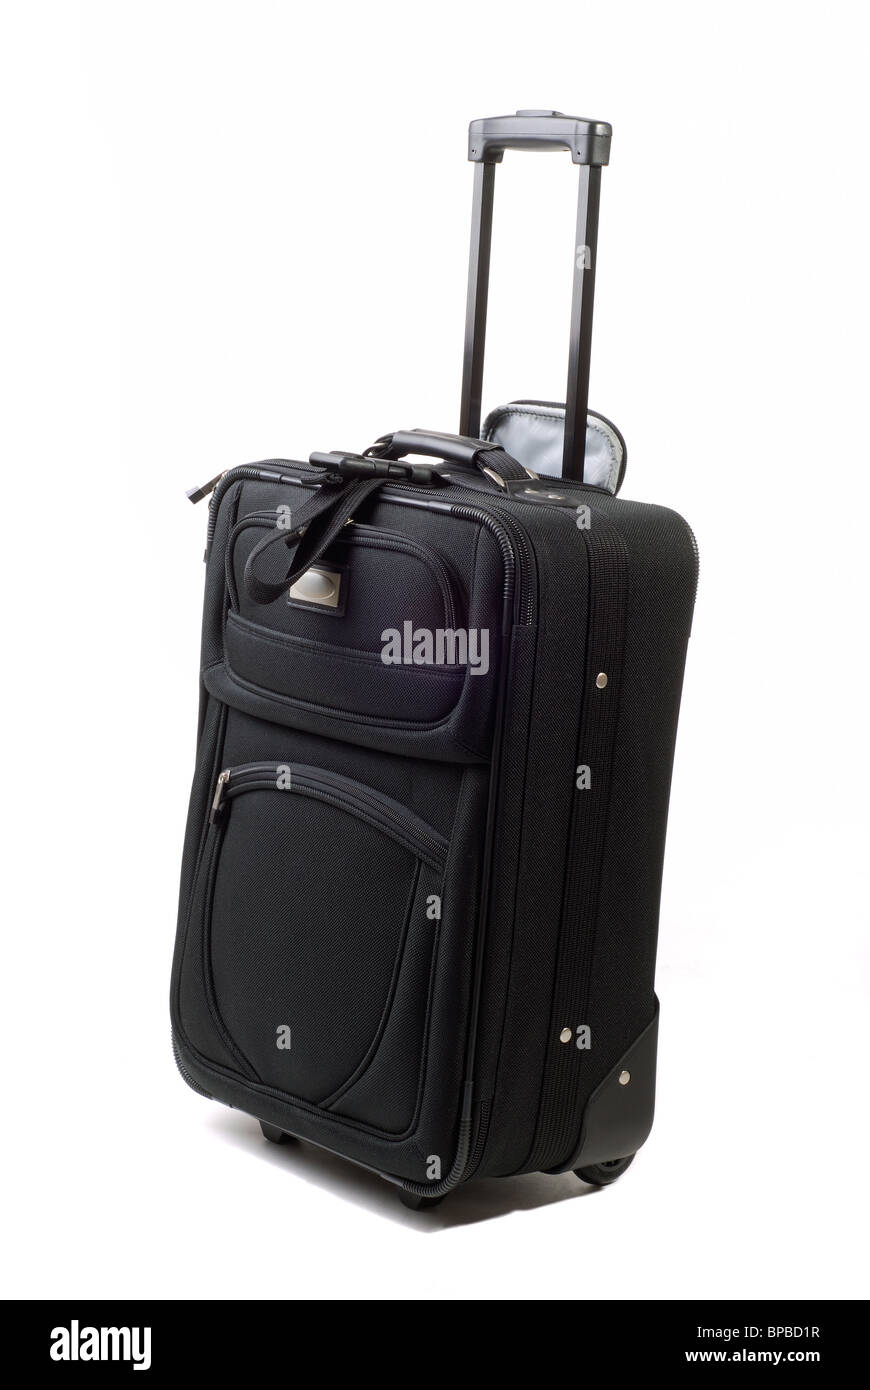 Black Pull Along Bag On Wheels With Extending Handle, Carry On Luggage For Air Travel Stock Photo